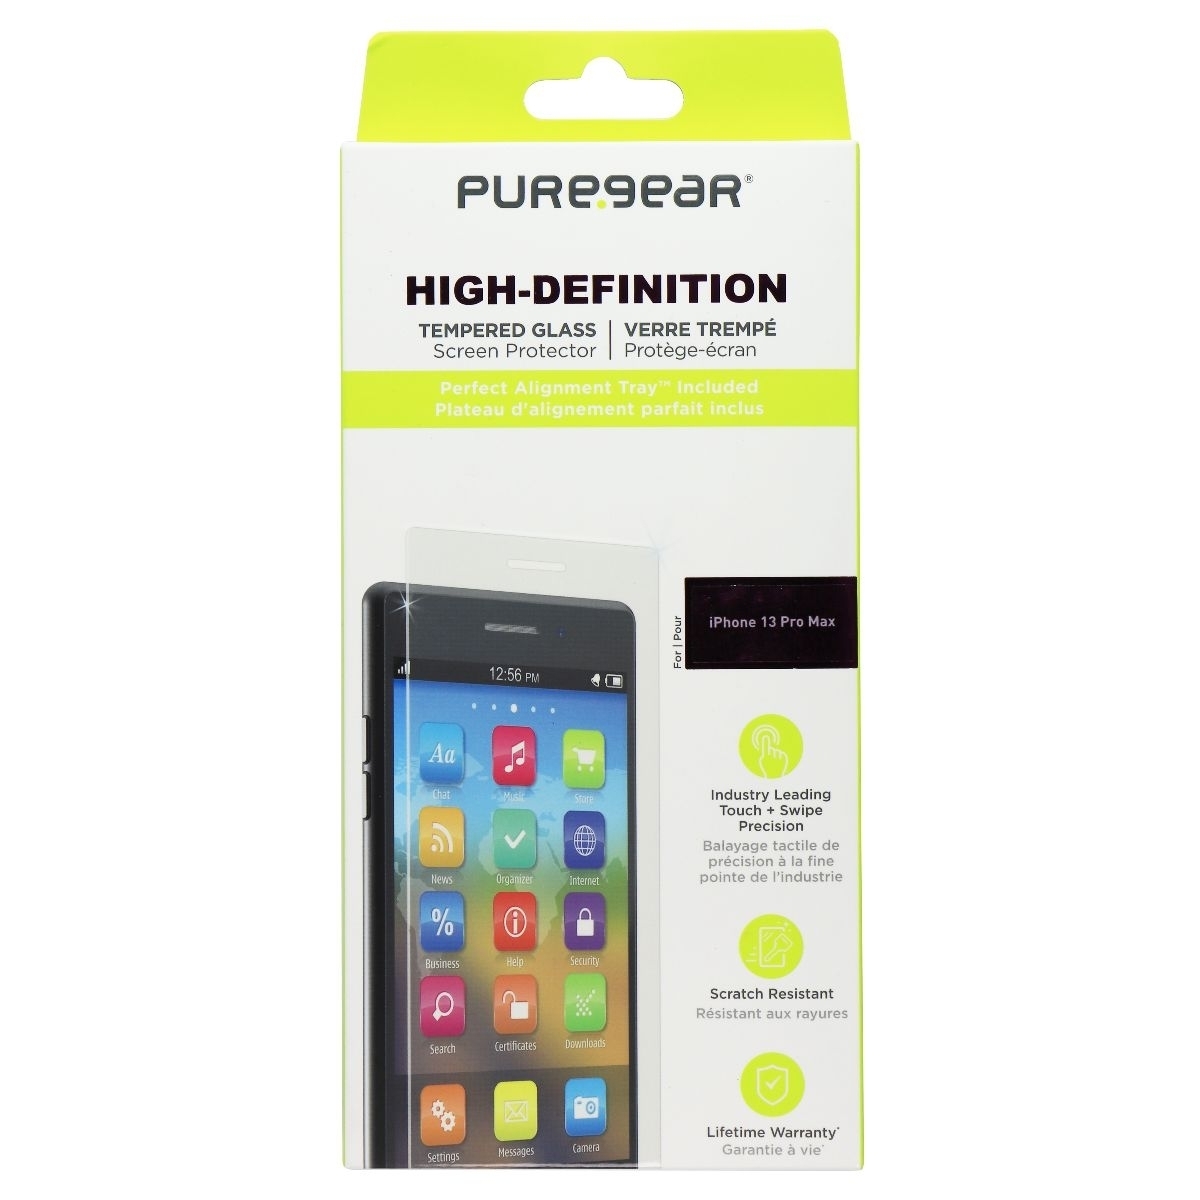 PureGear High-Definition Tempered Glass For Apple IPhone 13 Pro Max - Clear (Refurbished)